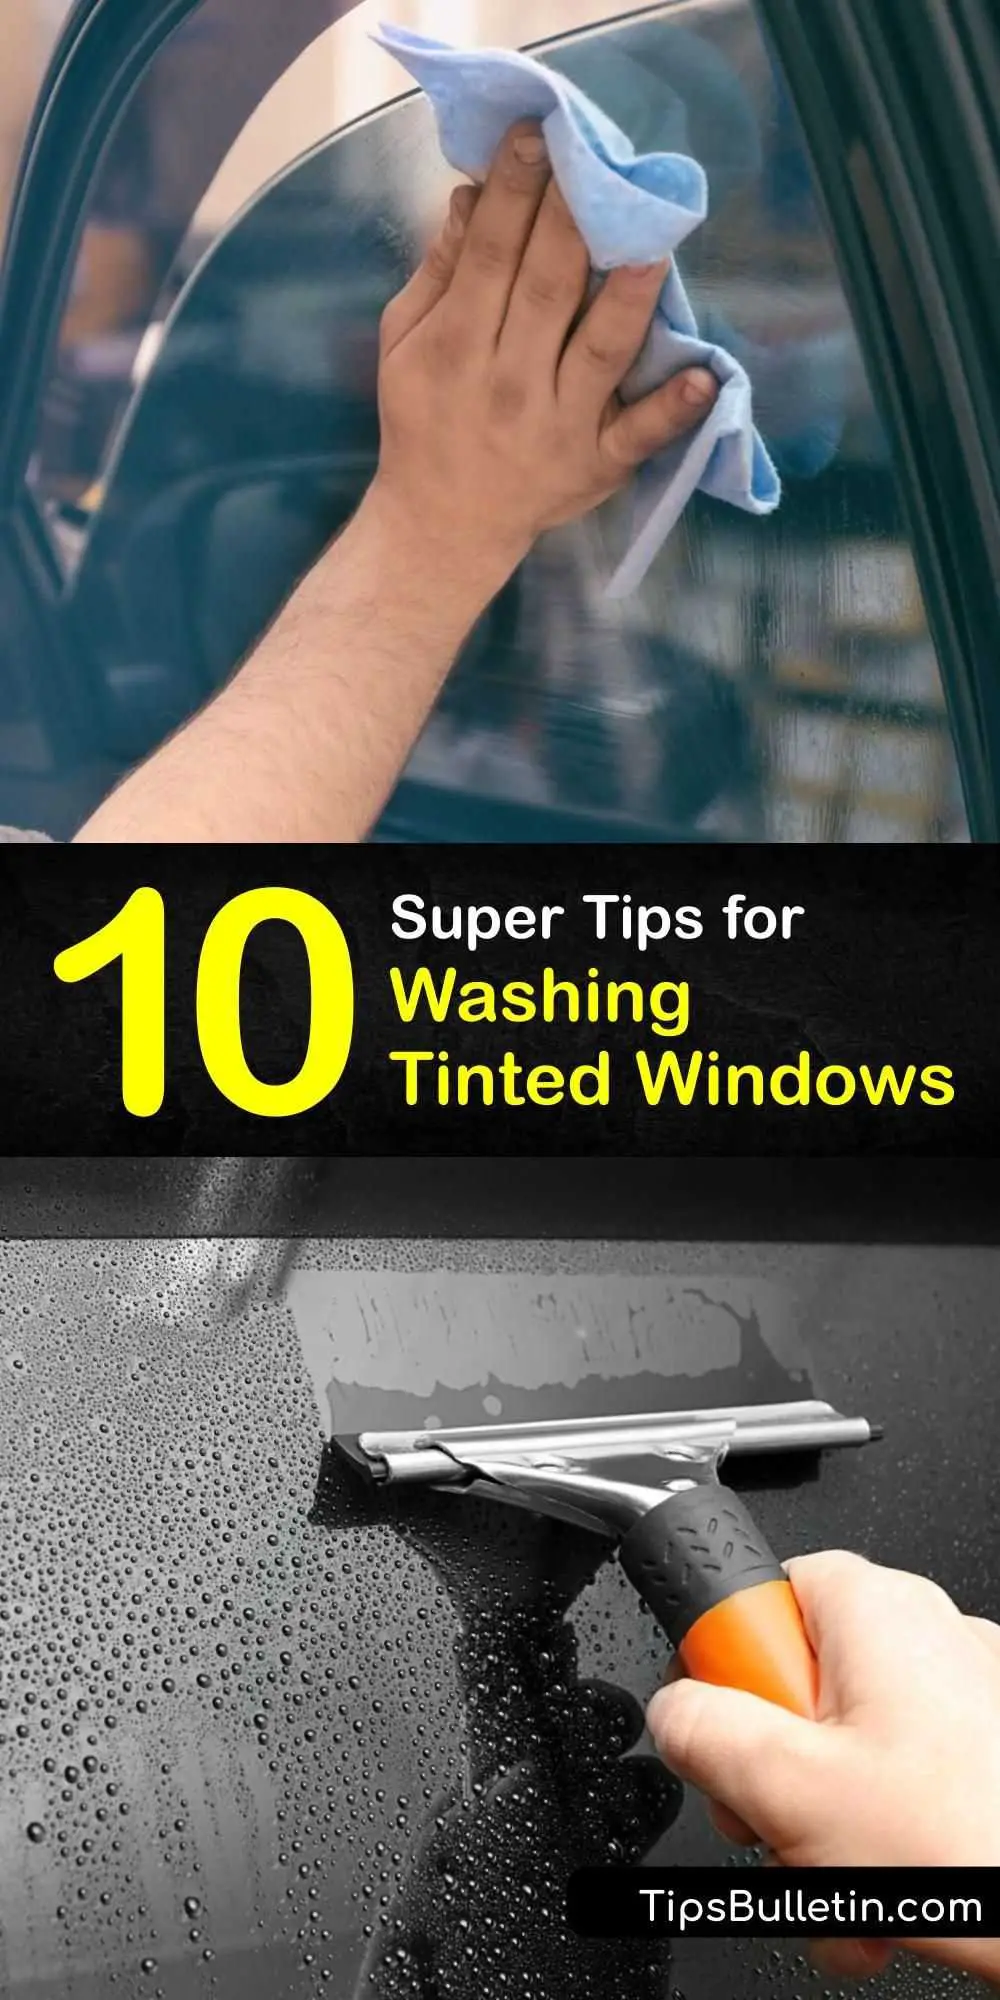 Can you clean tinted windows with windex